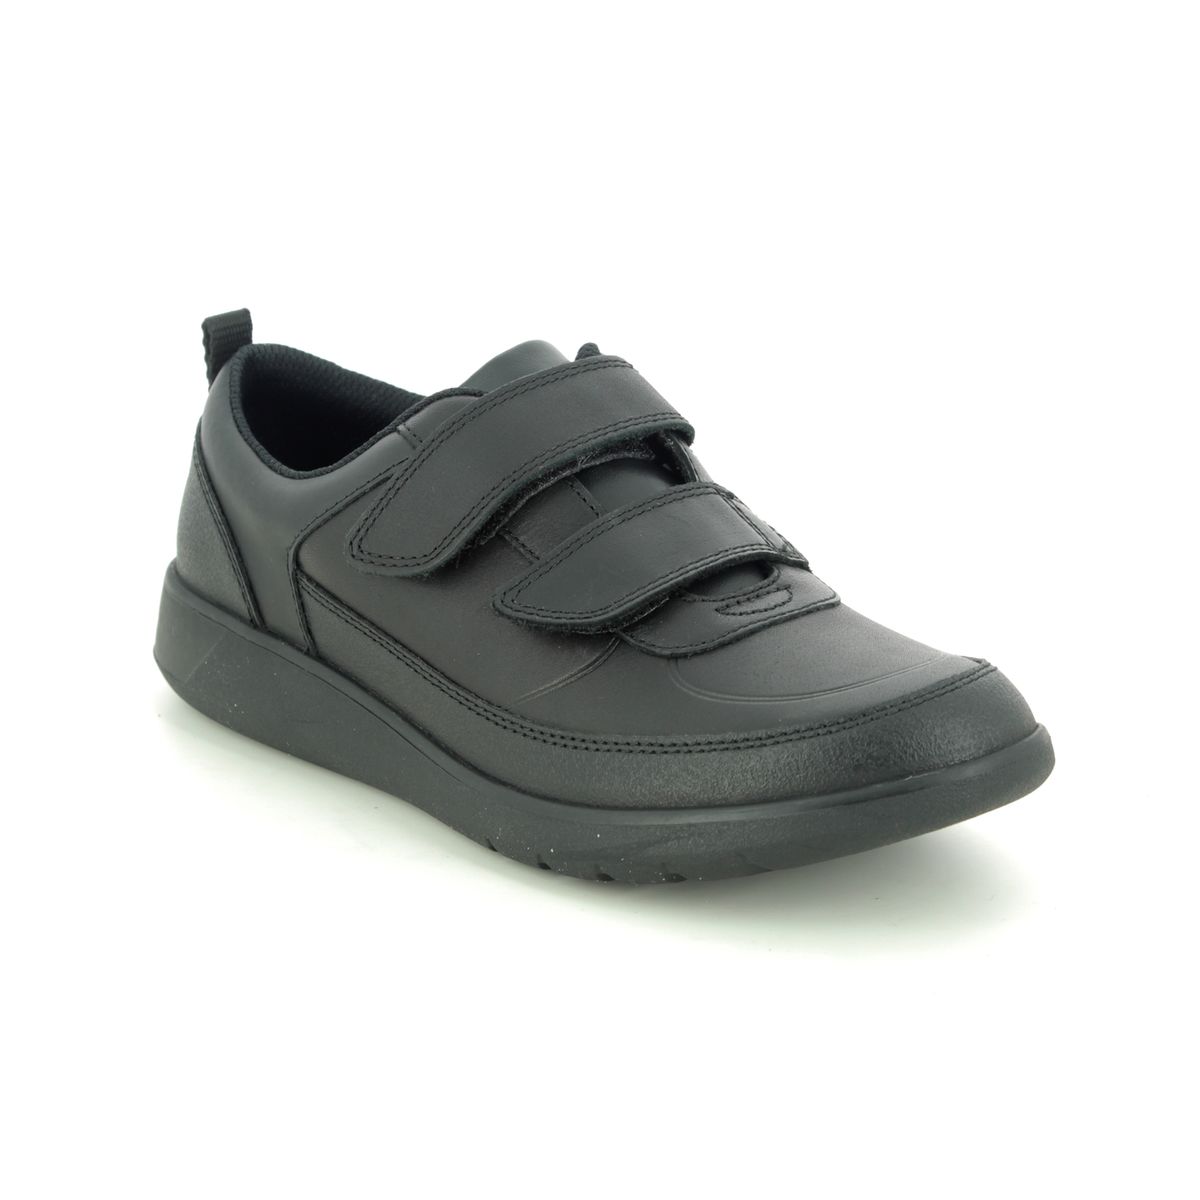 Clarks Scape Flare Y Black Leather Kids Boys Shoes 494098H In Size 4.5 In Plain Black Leather H Width Fitting Extra Wide For School For kids